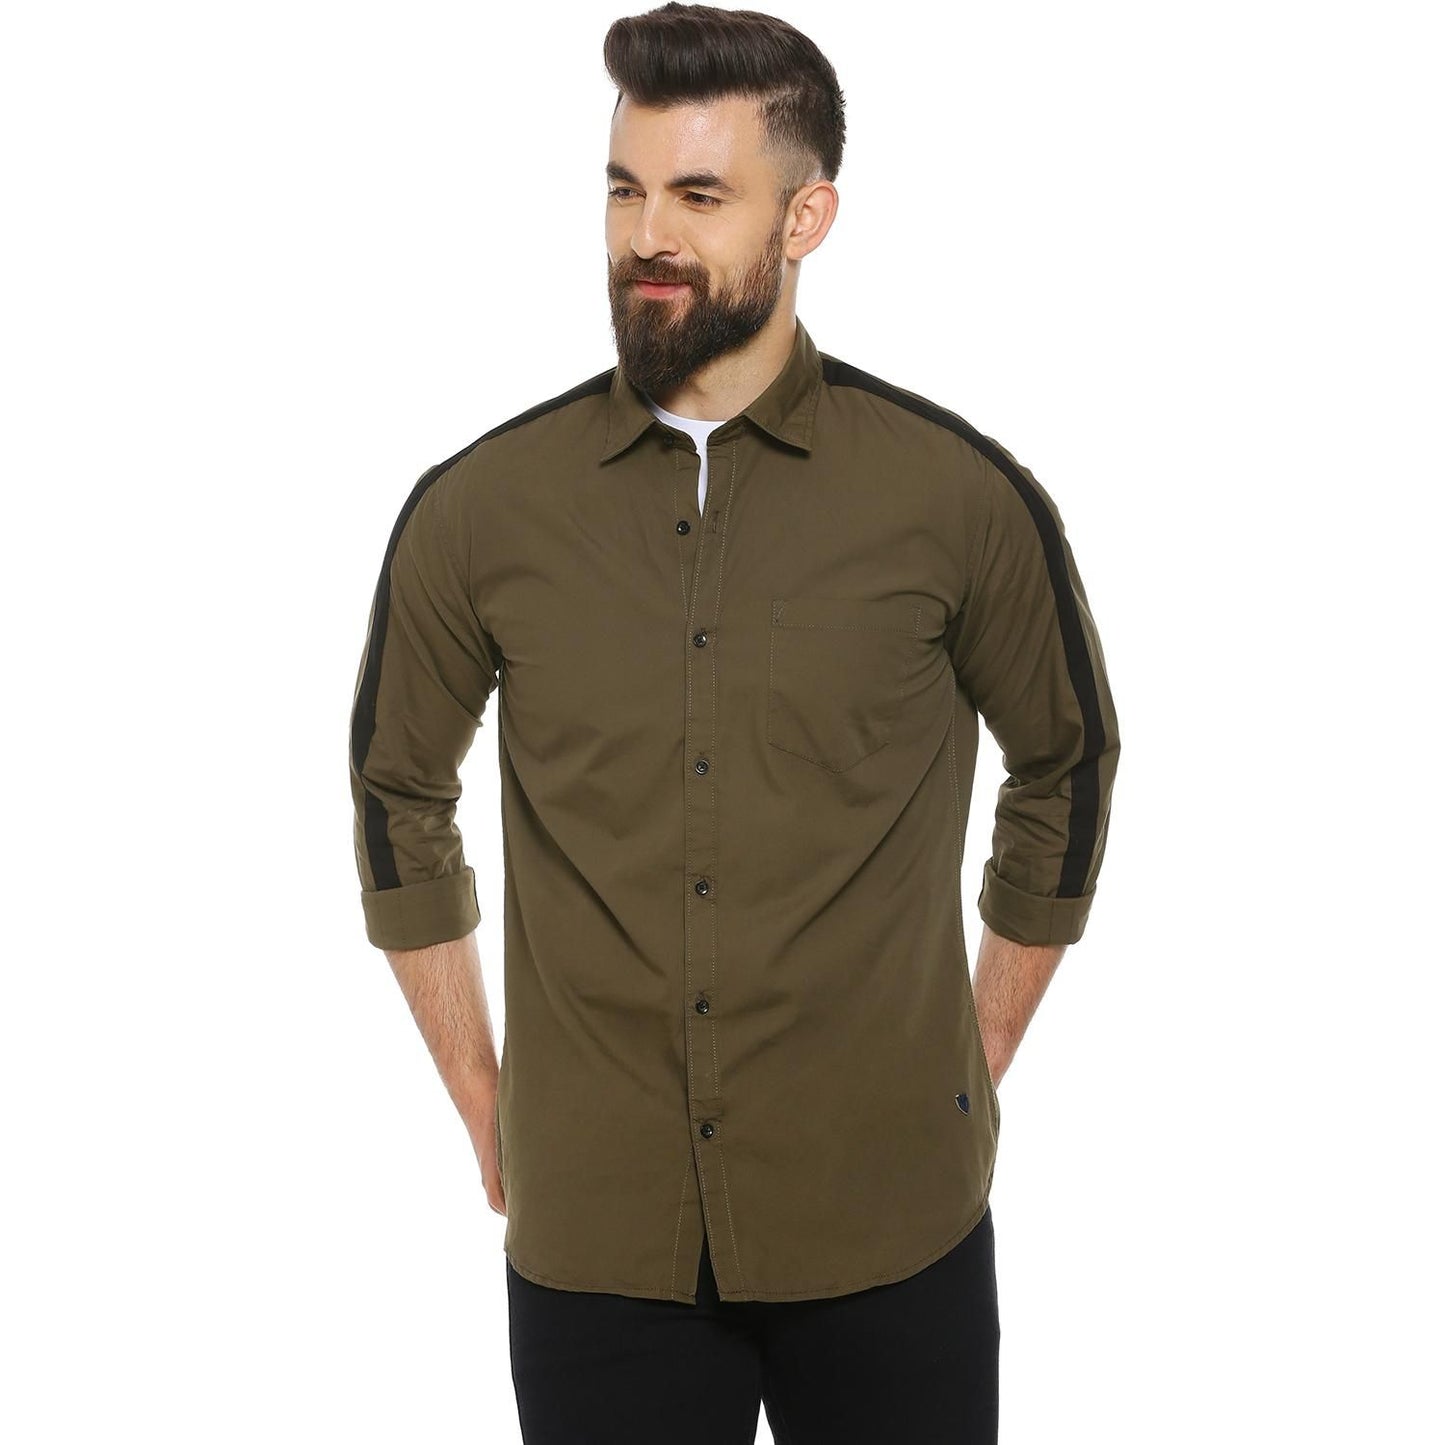 Campus Sutra Cotton Blend Solid Full Sleeves Casual Shirt